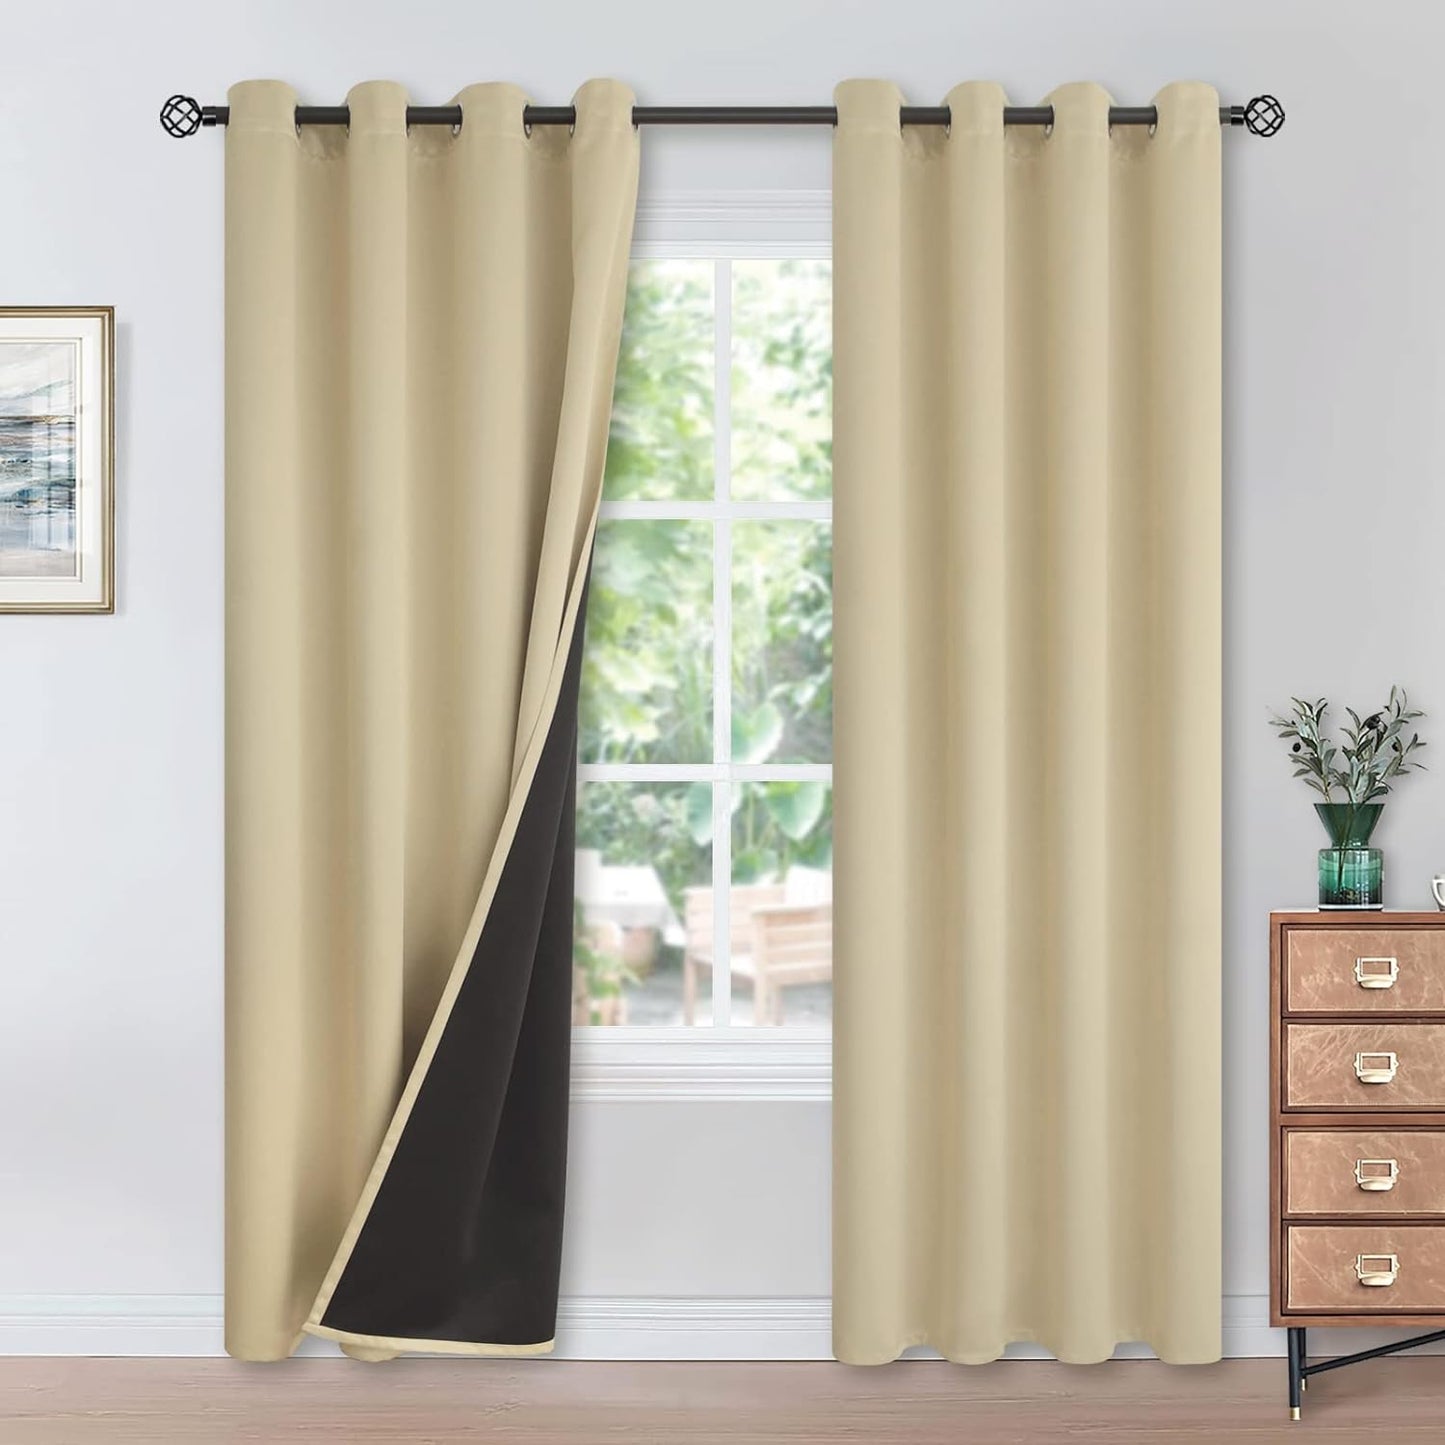 Youngstex Black 100% Blackout Curtains 63 Inches for Bedroom Thermal Insulated Total Room Darkening Curtains for Living Room Window with Black Back Grommet, 2 Panels, 42 X 63 Inch  YoungsTex Beige 52W X 95L 